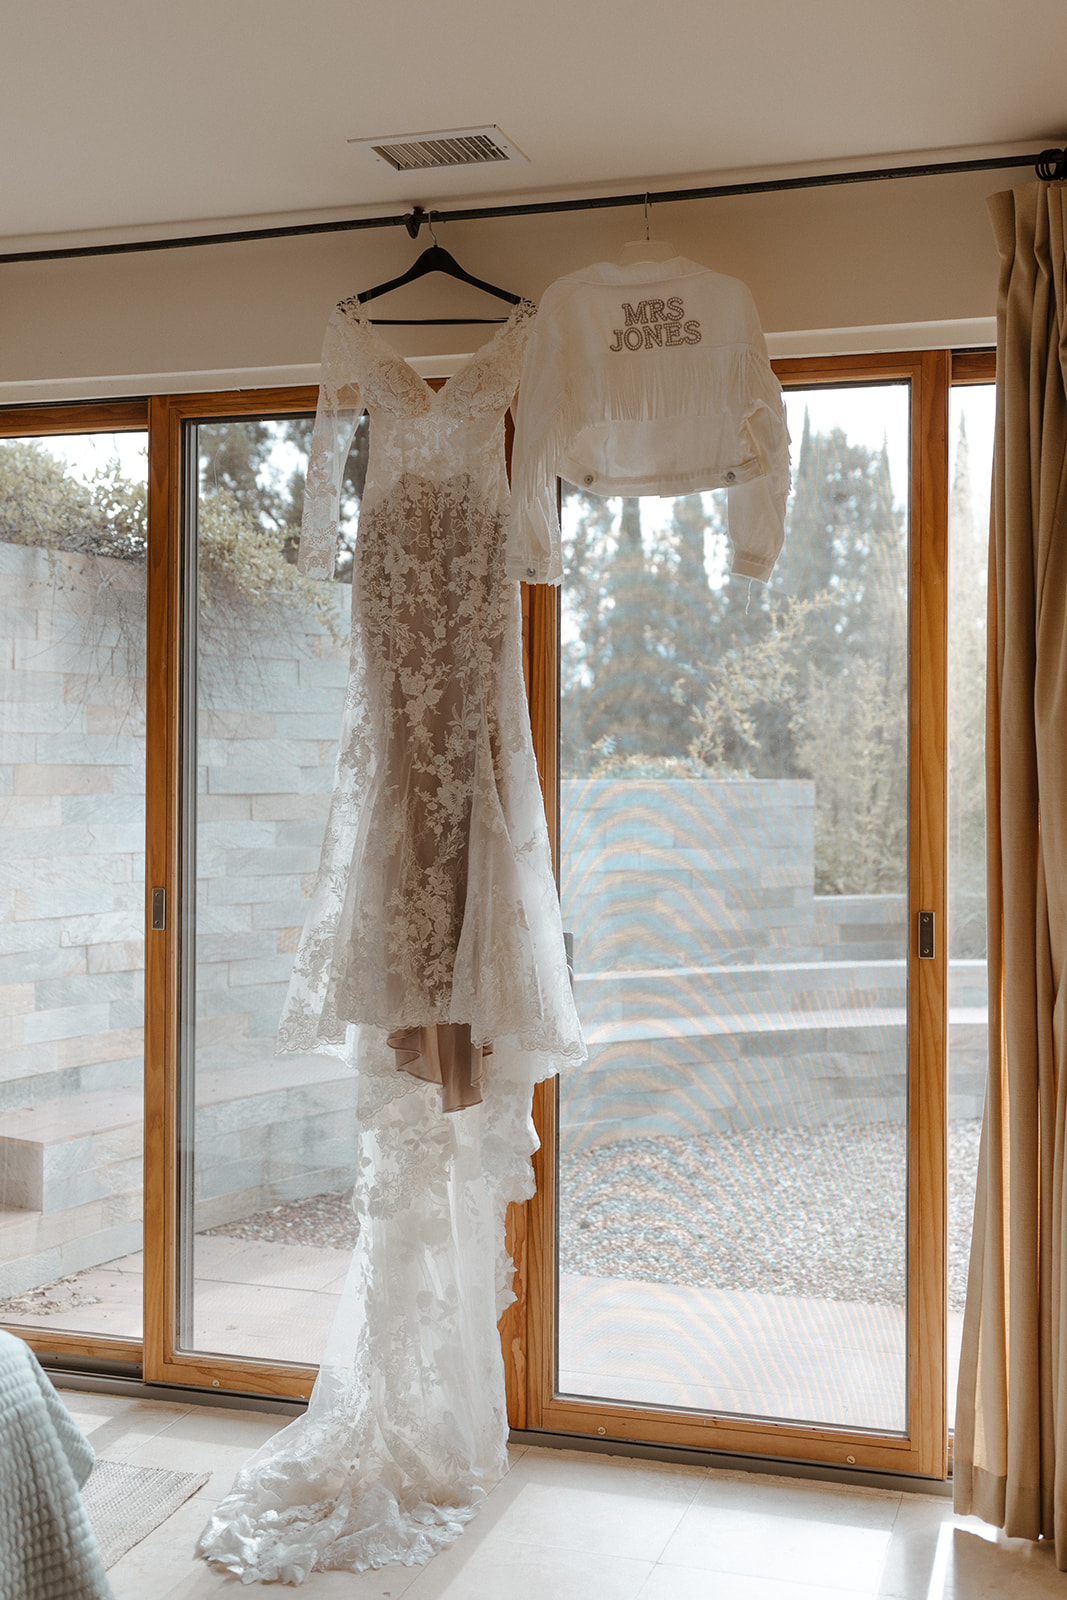 bride's dress and jacket hanging while she is getting ready